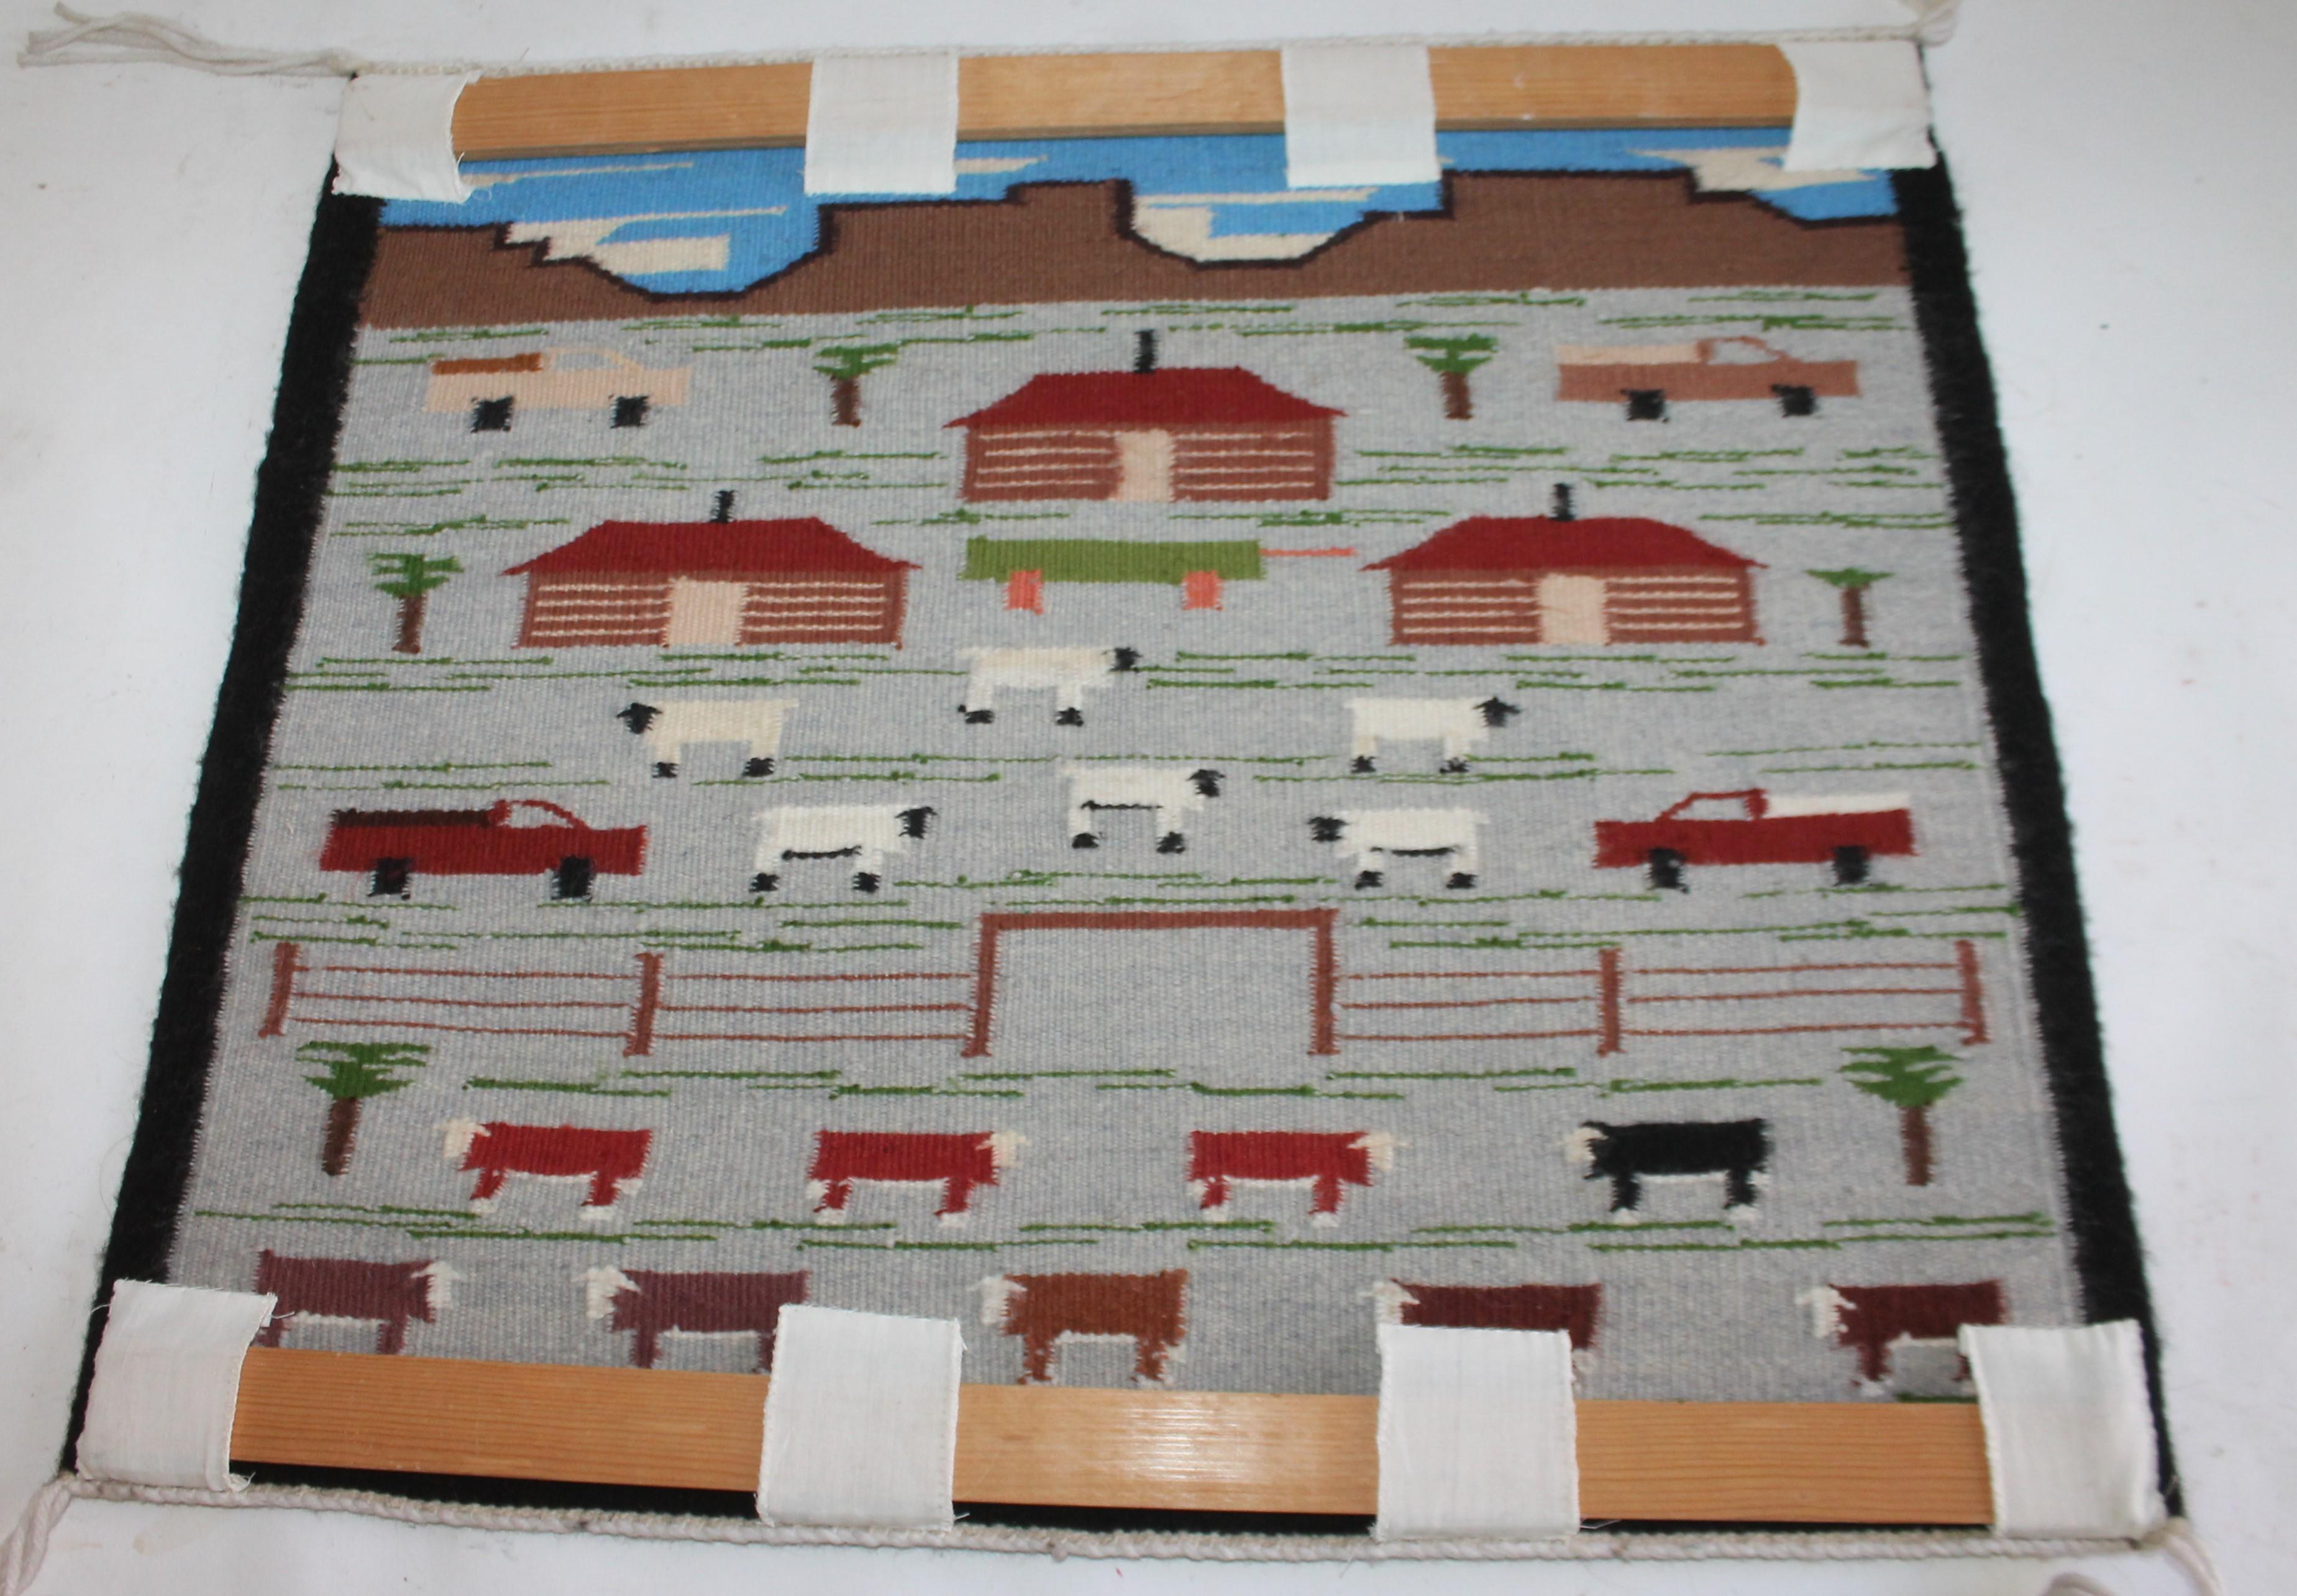 This fantastic pictorial Navajo Weaving is in great condition and makes a great wall hanging. Could make a fantastic pillow but makes a better wall art.